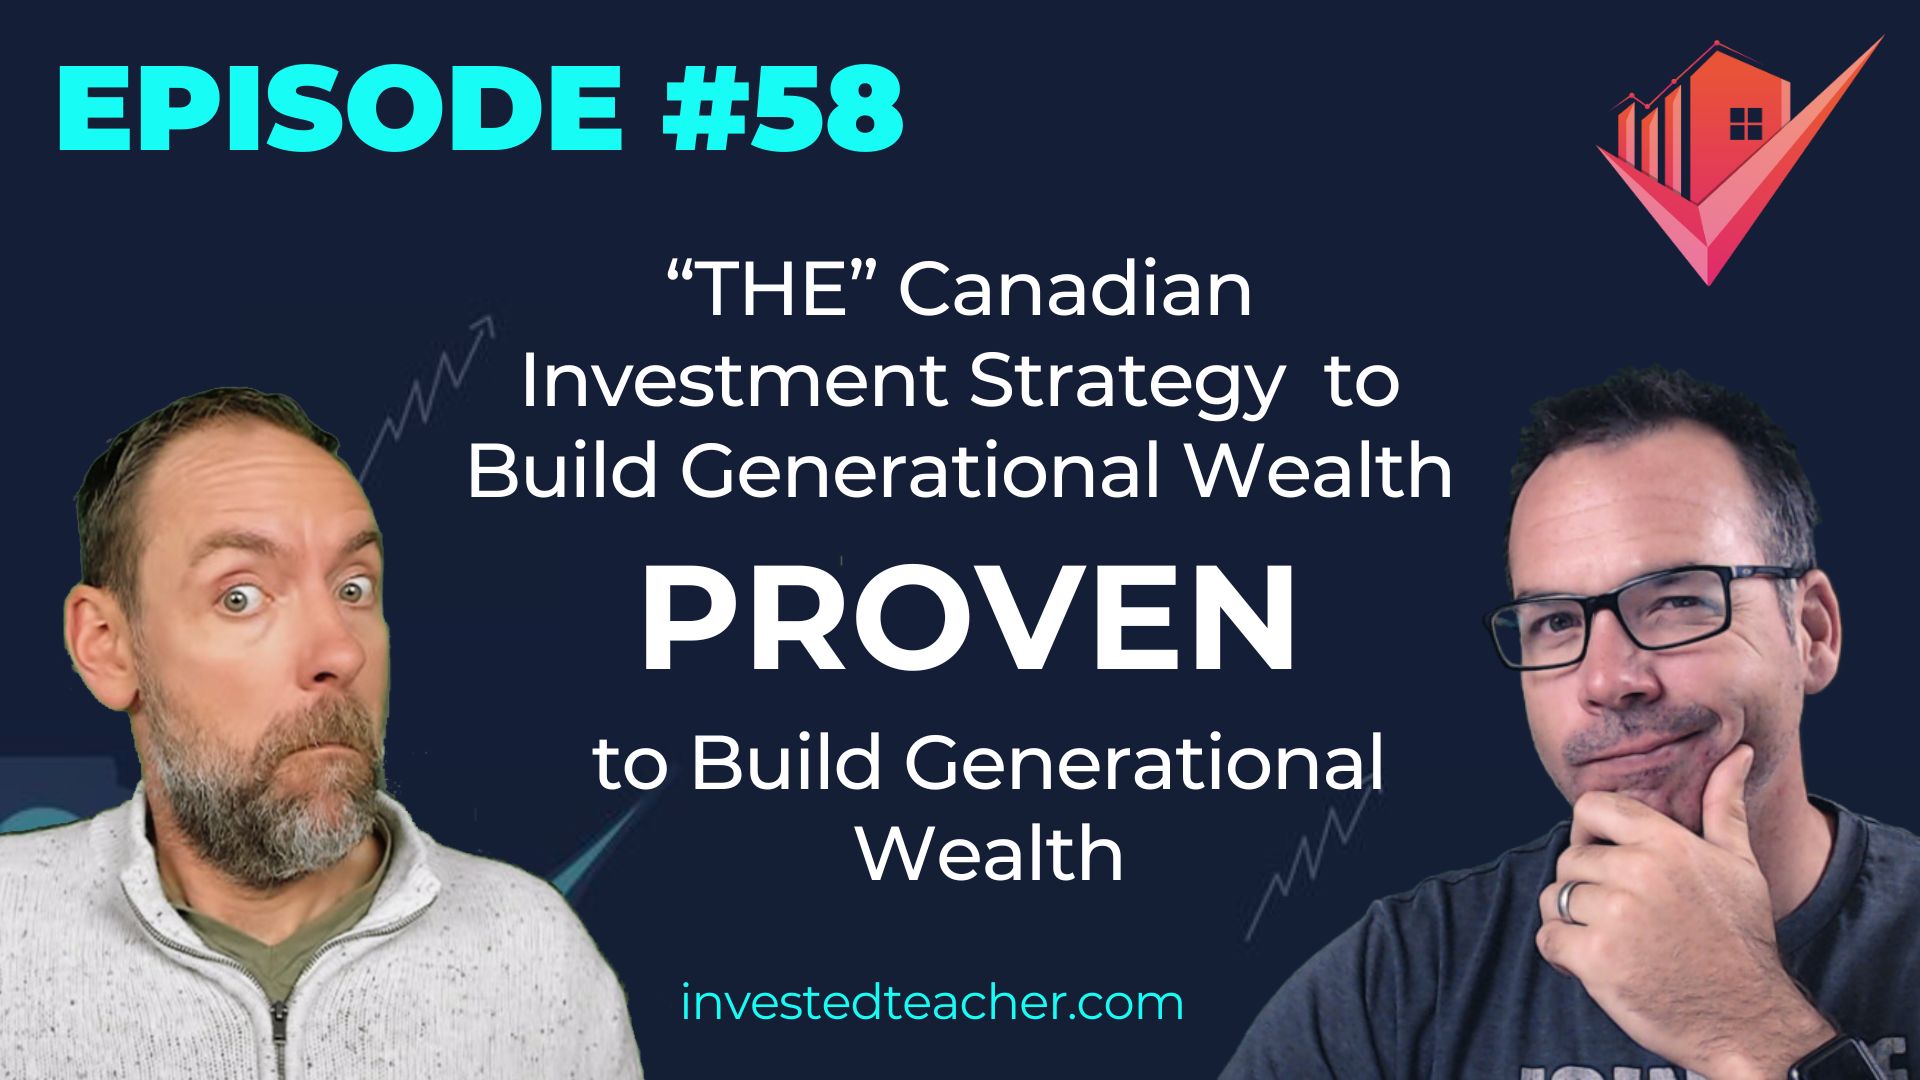 Episode 58: “THE” Canadian Investment Strategy PROVEN to Build Generational Wealth